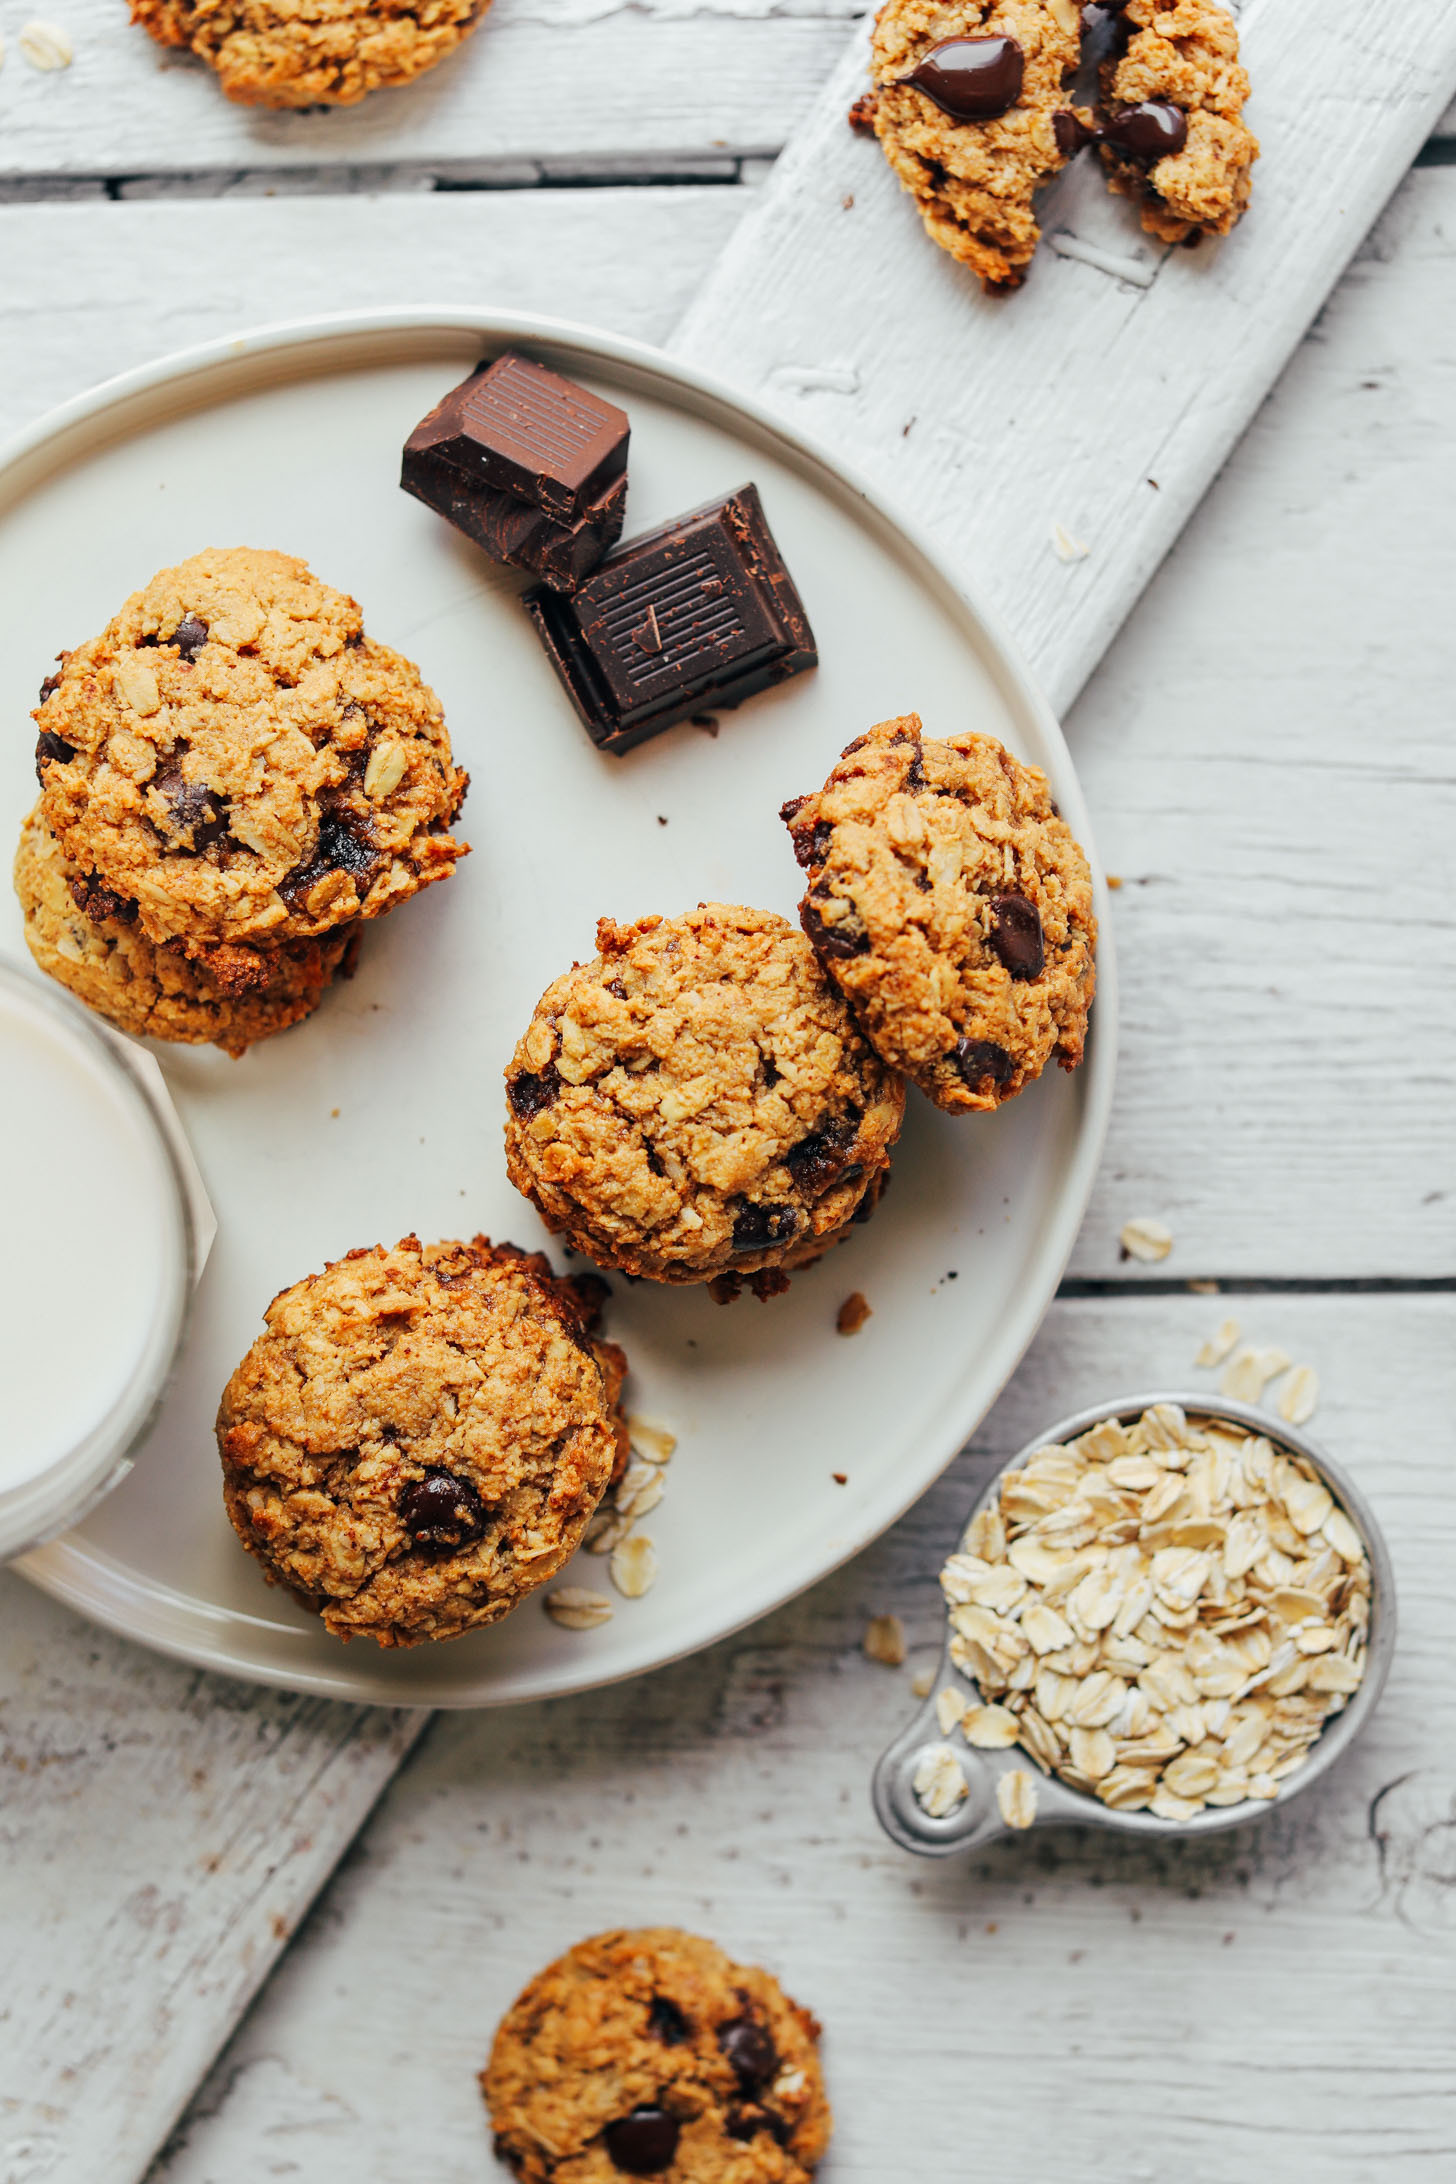 Healthy Vegan Cookie Recipes
 Gluten Free Oatmeal Chocolate Chip Cookies